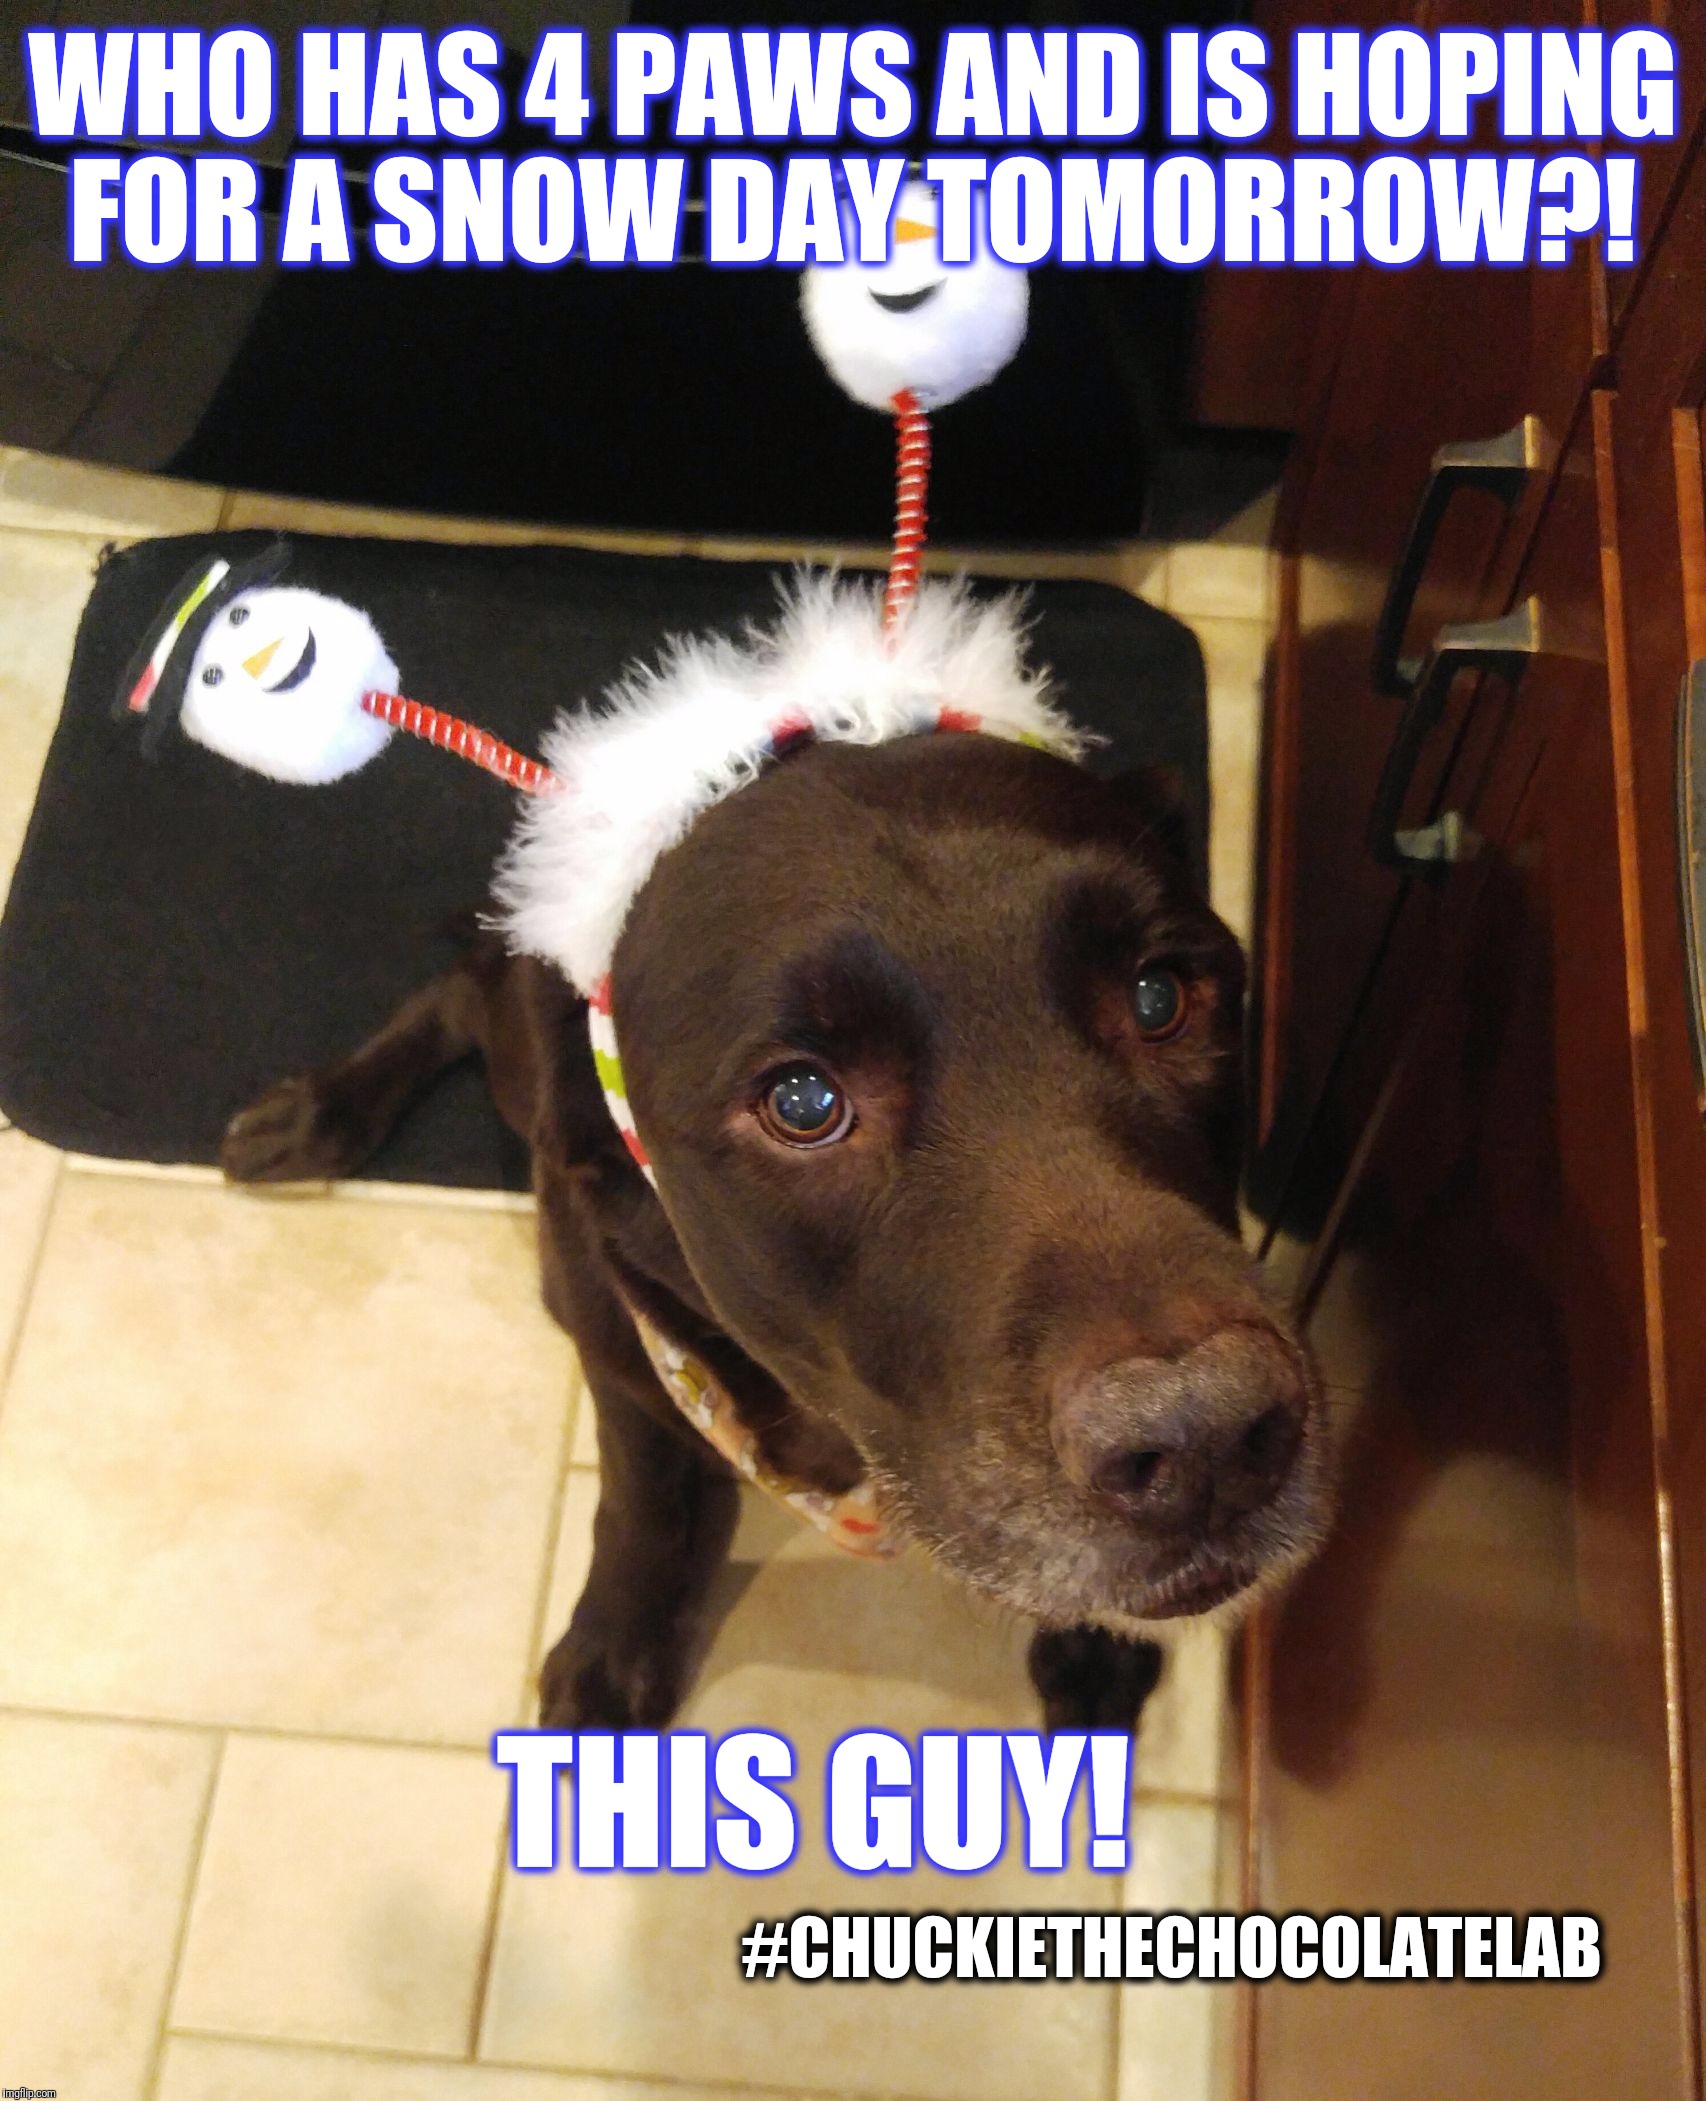 Who wants a snow day?  |  WHO HAS 4 PAWS AND IS HOPING FOR A SNOW DAY TOMORROW?! #CHUCKIETHECHOCOLATELAB; THIS GUY! | image tagged in chuckie the chocolate lab,snow day,dogs,funny,snow,this guy | made w/ Imgflip meme maker